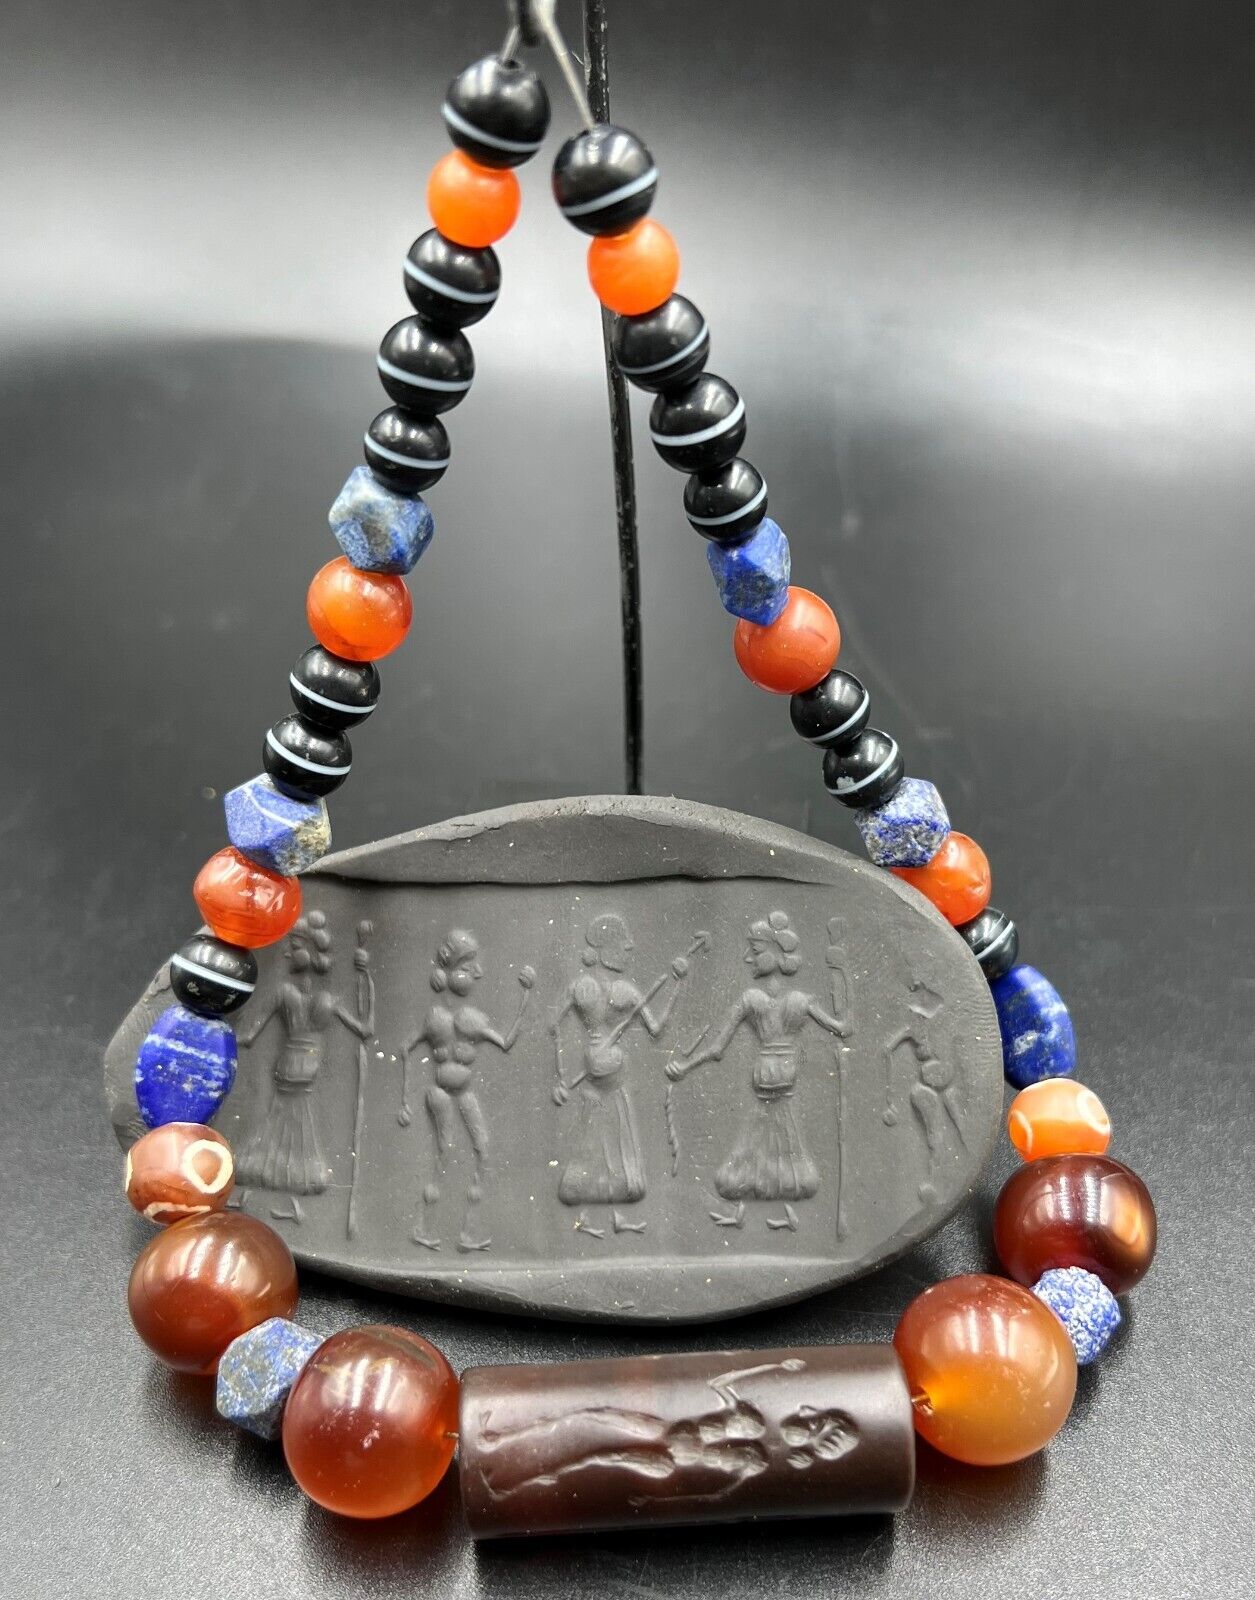 Vintage Antique Style Intaglio Stamp A Long With Agate And Lapis Beads Necklace